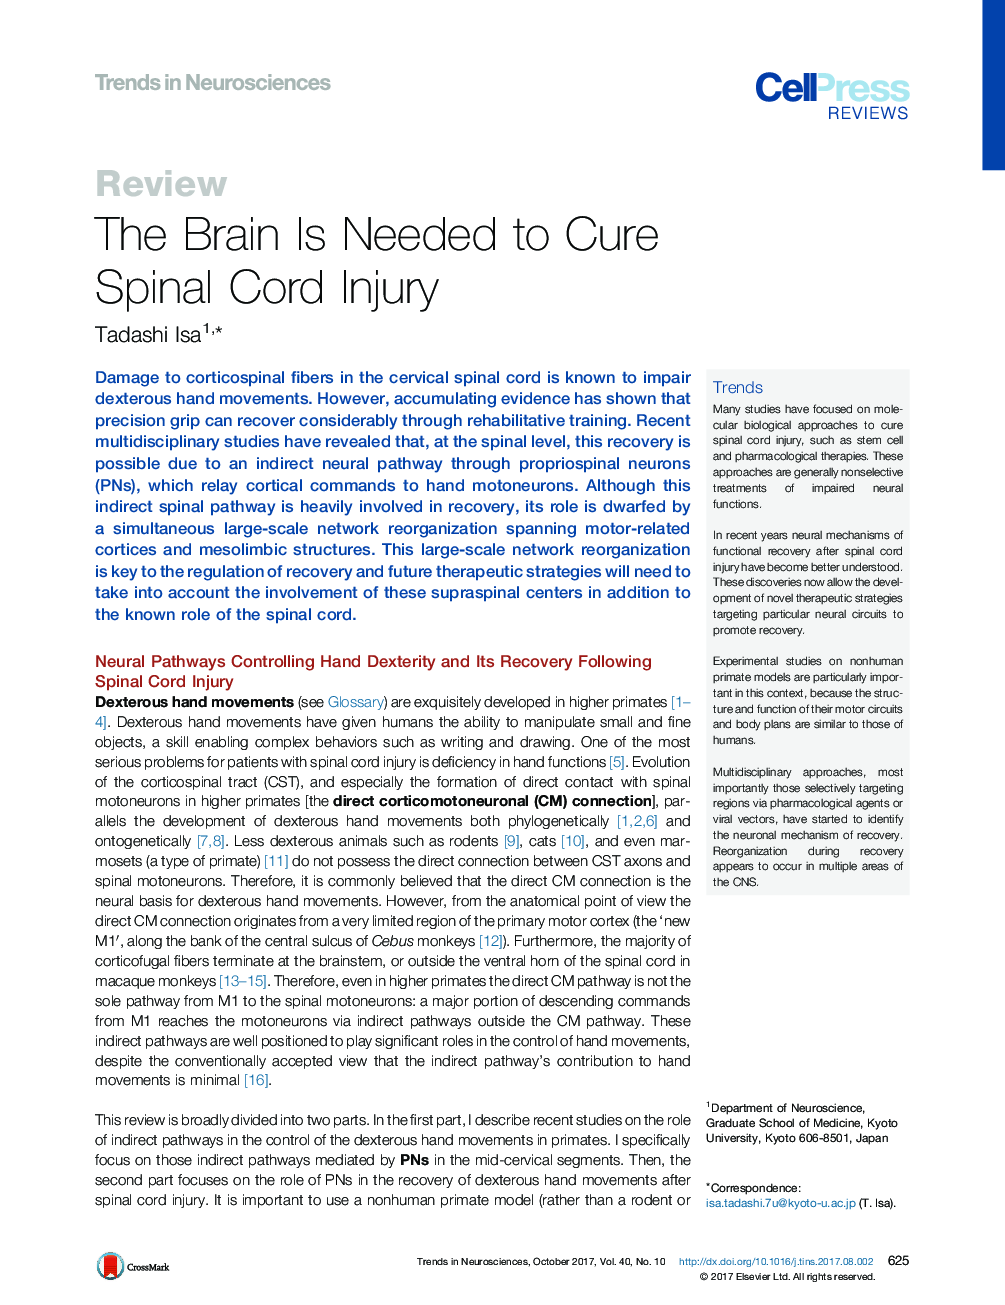 The Brain Is Needed to Cure Spinal Cord Injury